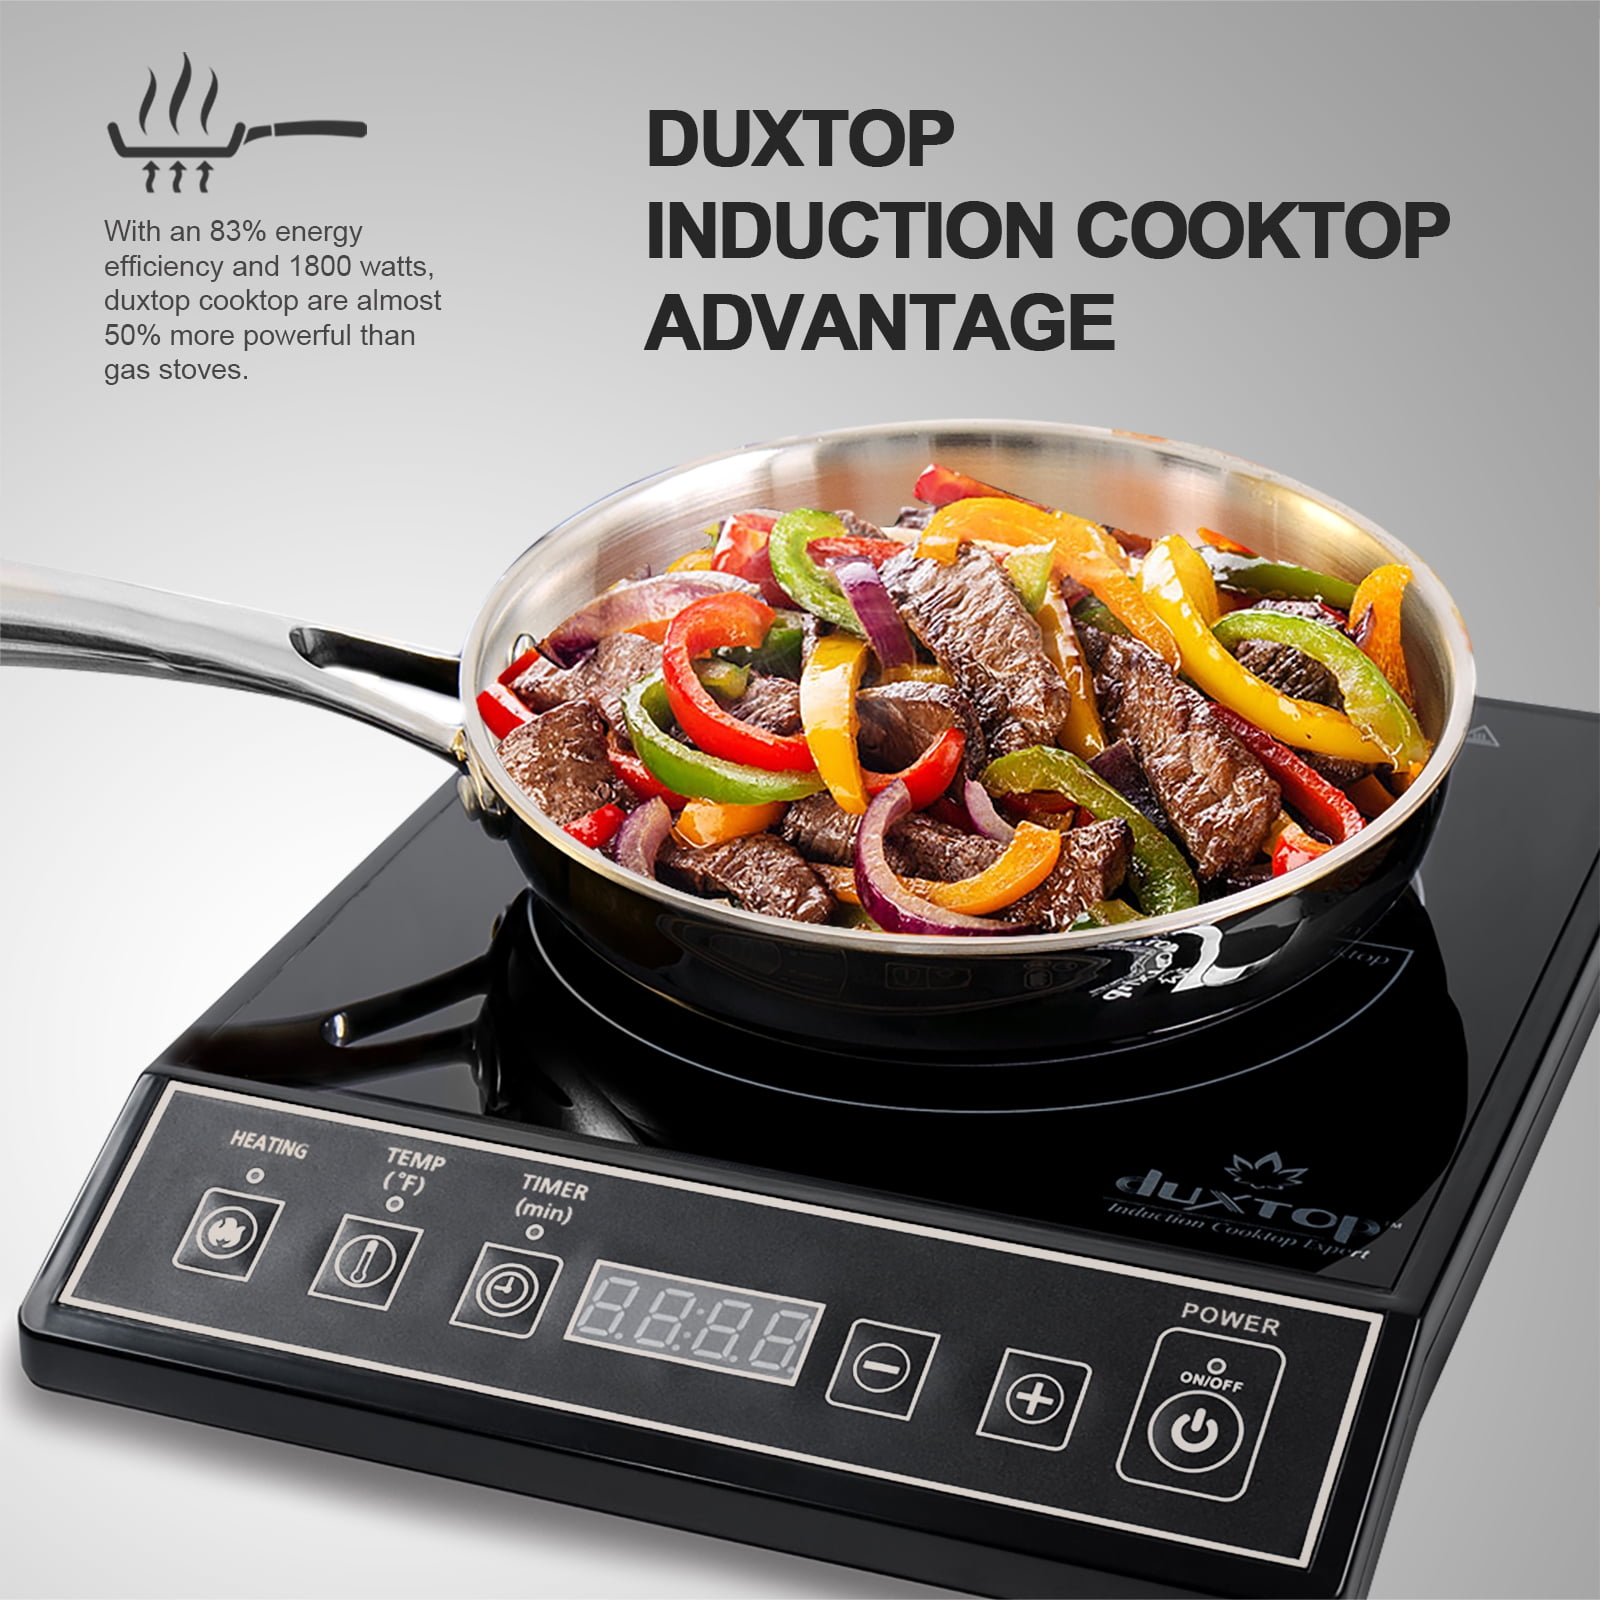 PORTABLE DOUBLE ELECTRIC CAST IRON COOKTOP Brand Duxtop NEW IN OPEN BOX